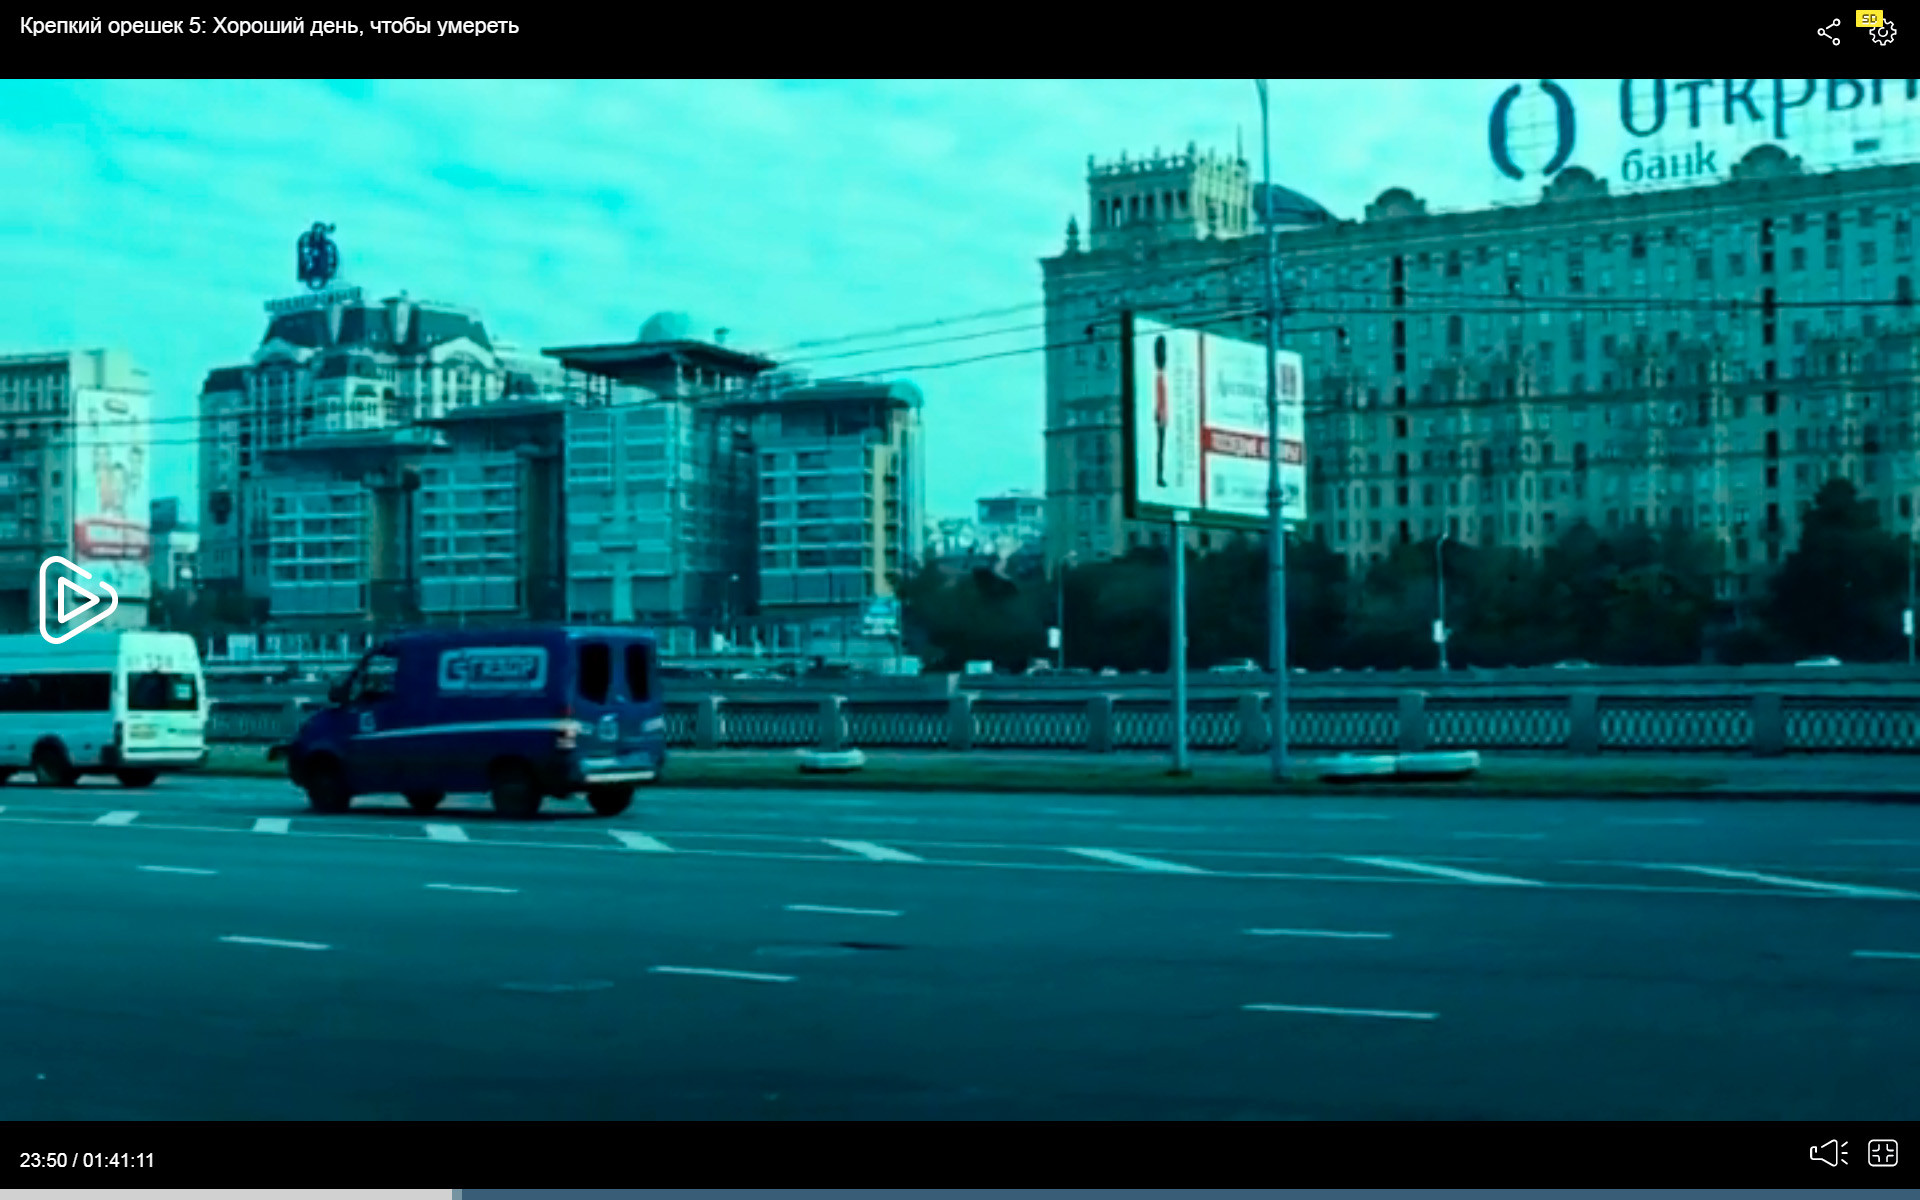 This, however, is a genuine view of Moscow, featuring the British Embassy on Smolenskaya Embankment